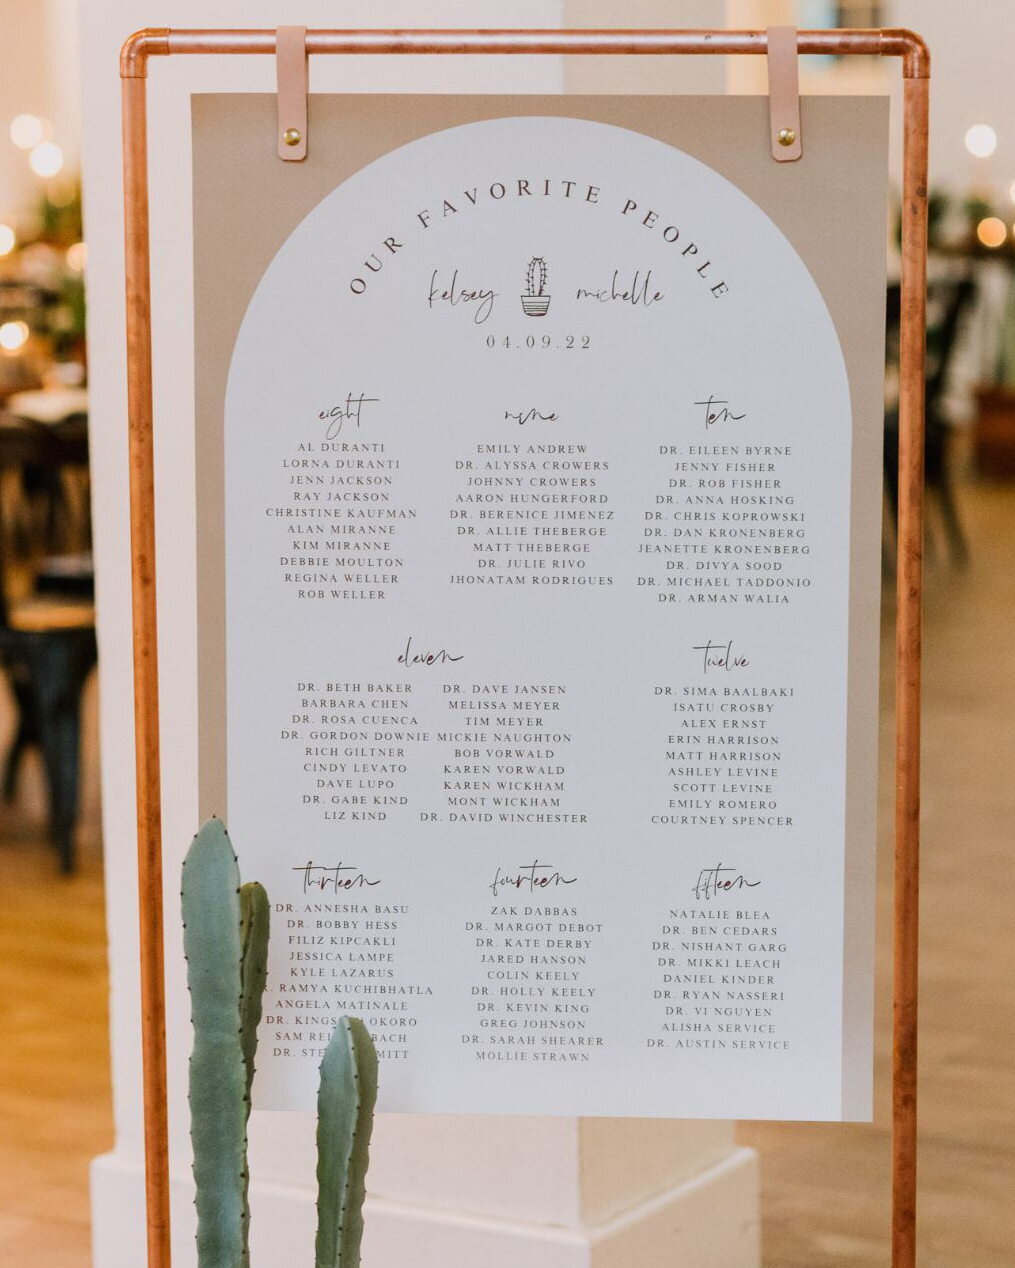 I spy with my little eye, a seating chart listing a room full of a couple&rsquo;s favorite people - and quite a room full of Doctors 🤝

Photography: @letsfrolictogether
Planning: @monikerevents @lunawilddesign @taymorrison_
Florals: @ahrflorals
Cate